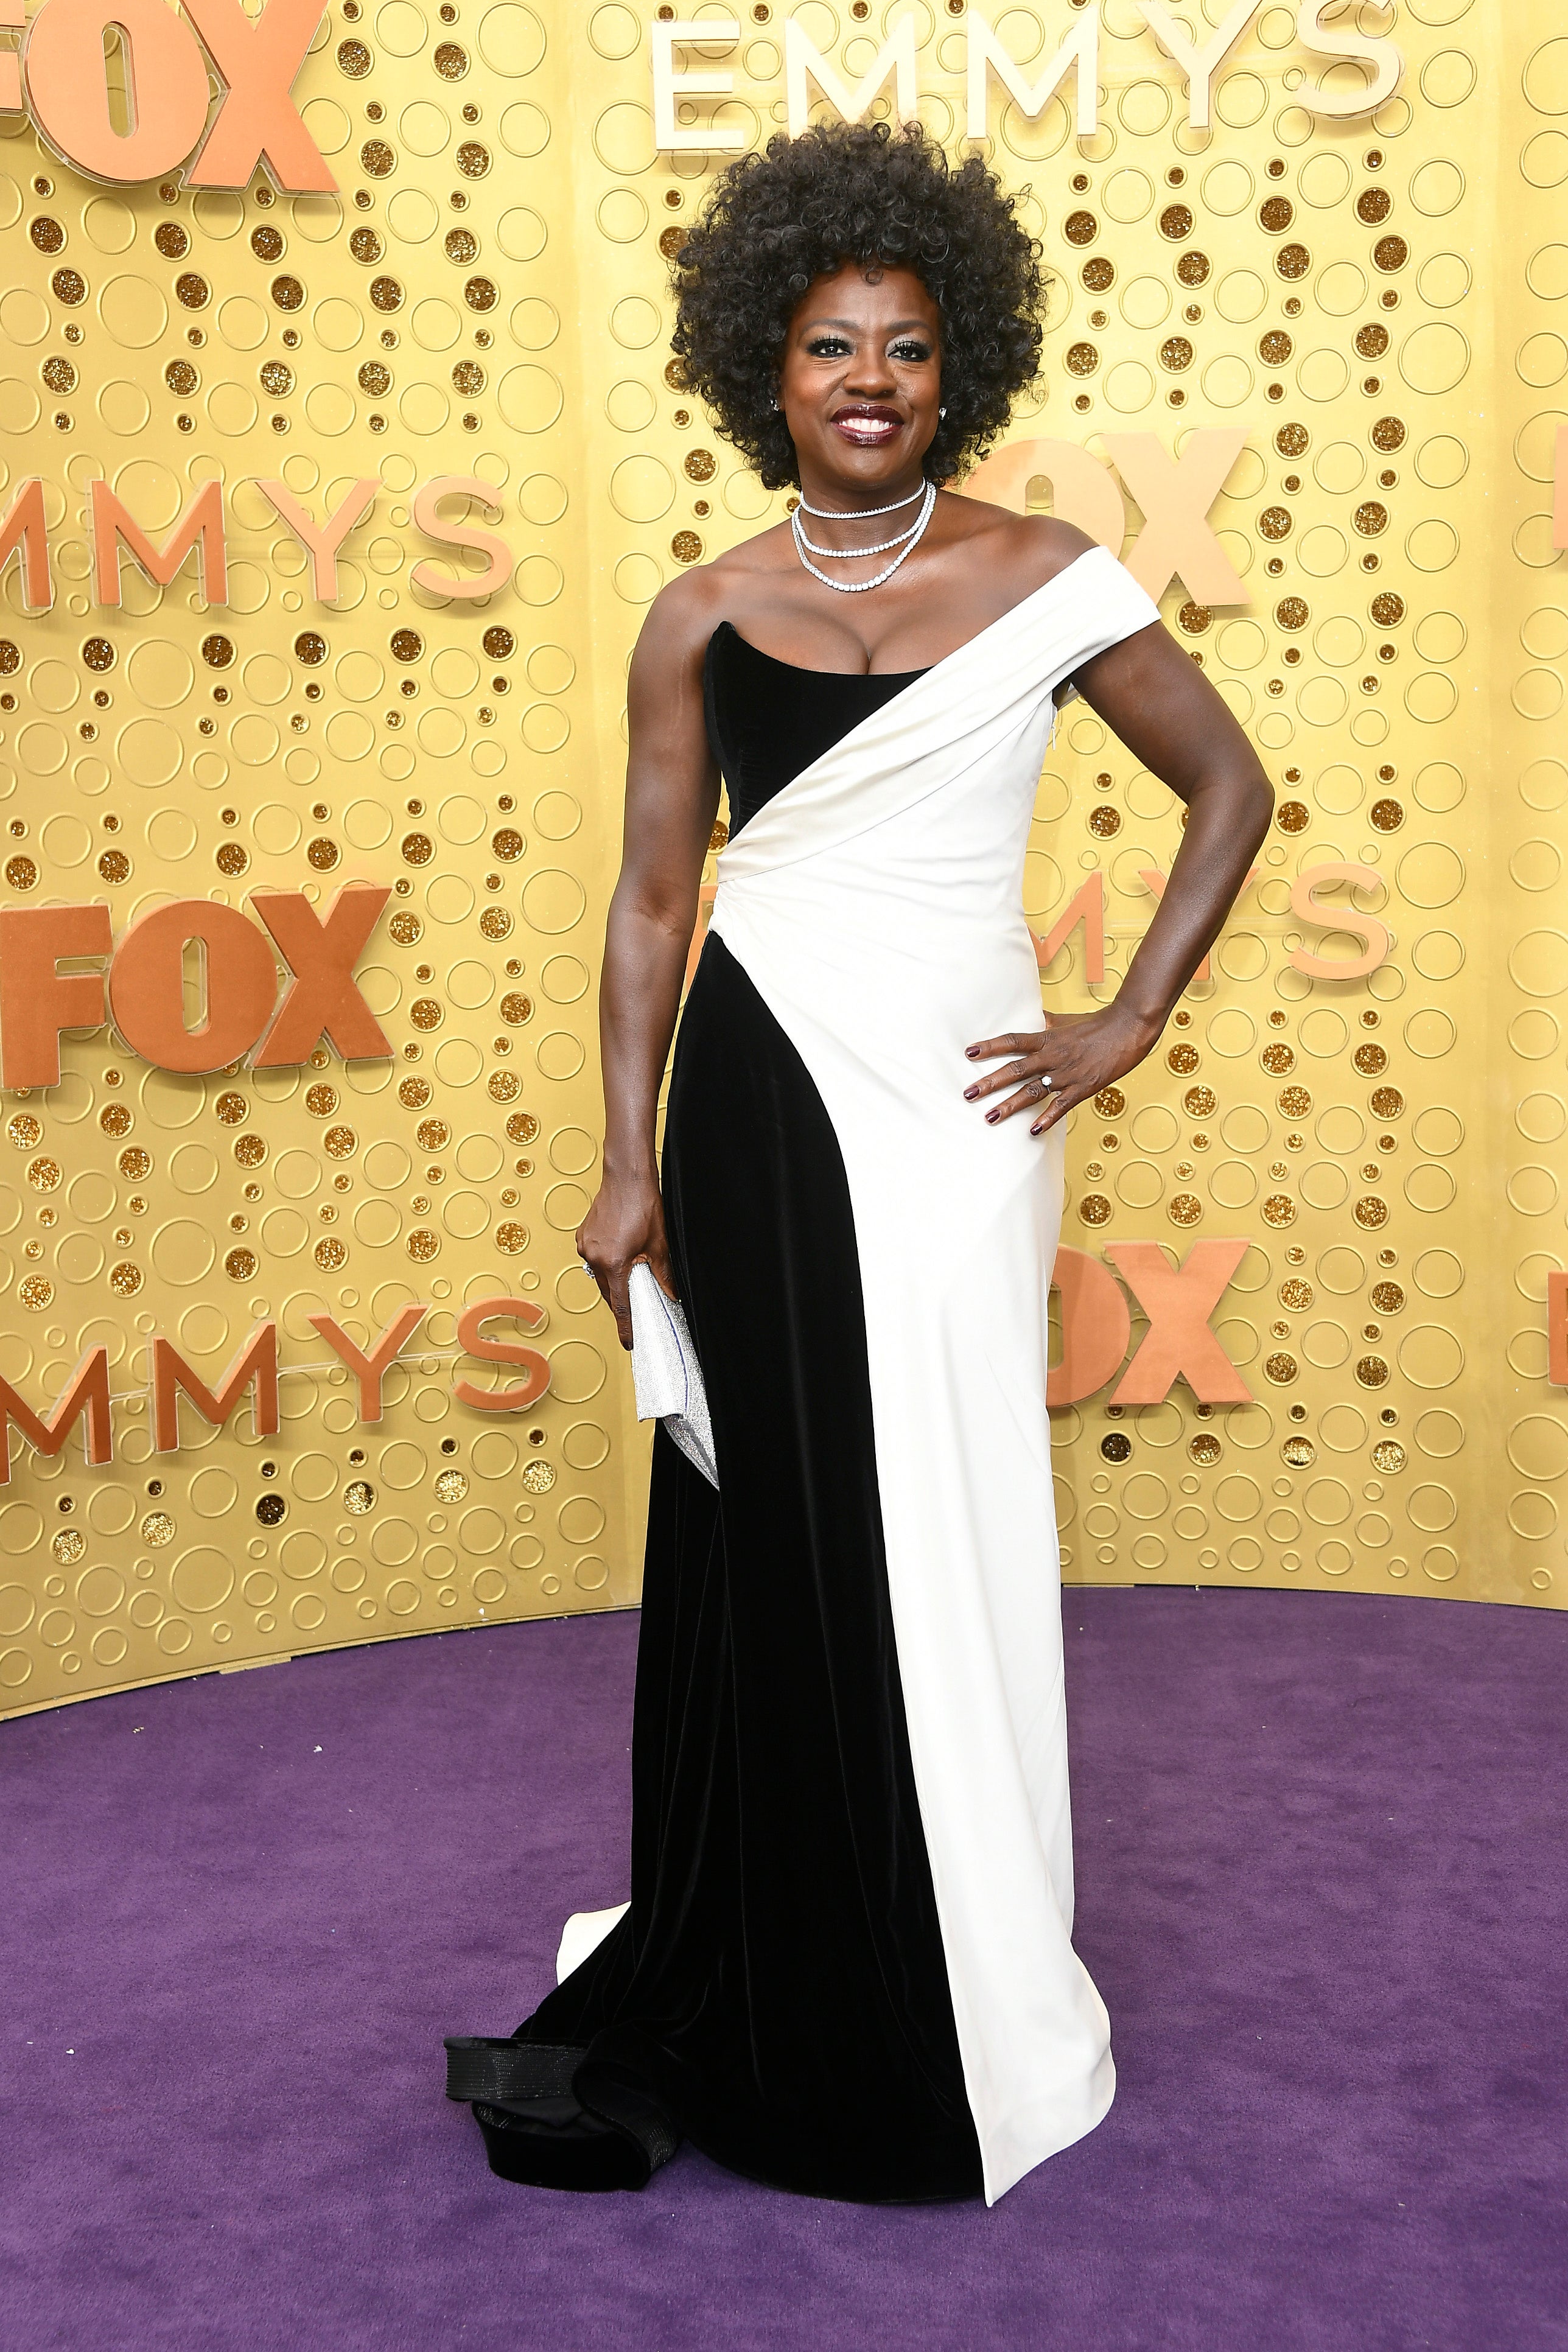 Did Anyone Catch The Two-Tone Trend That Stole The Show At The Emmys Red Carpet?